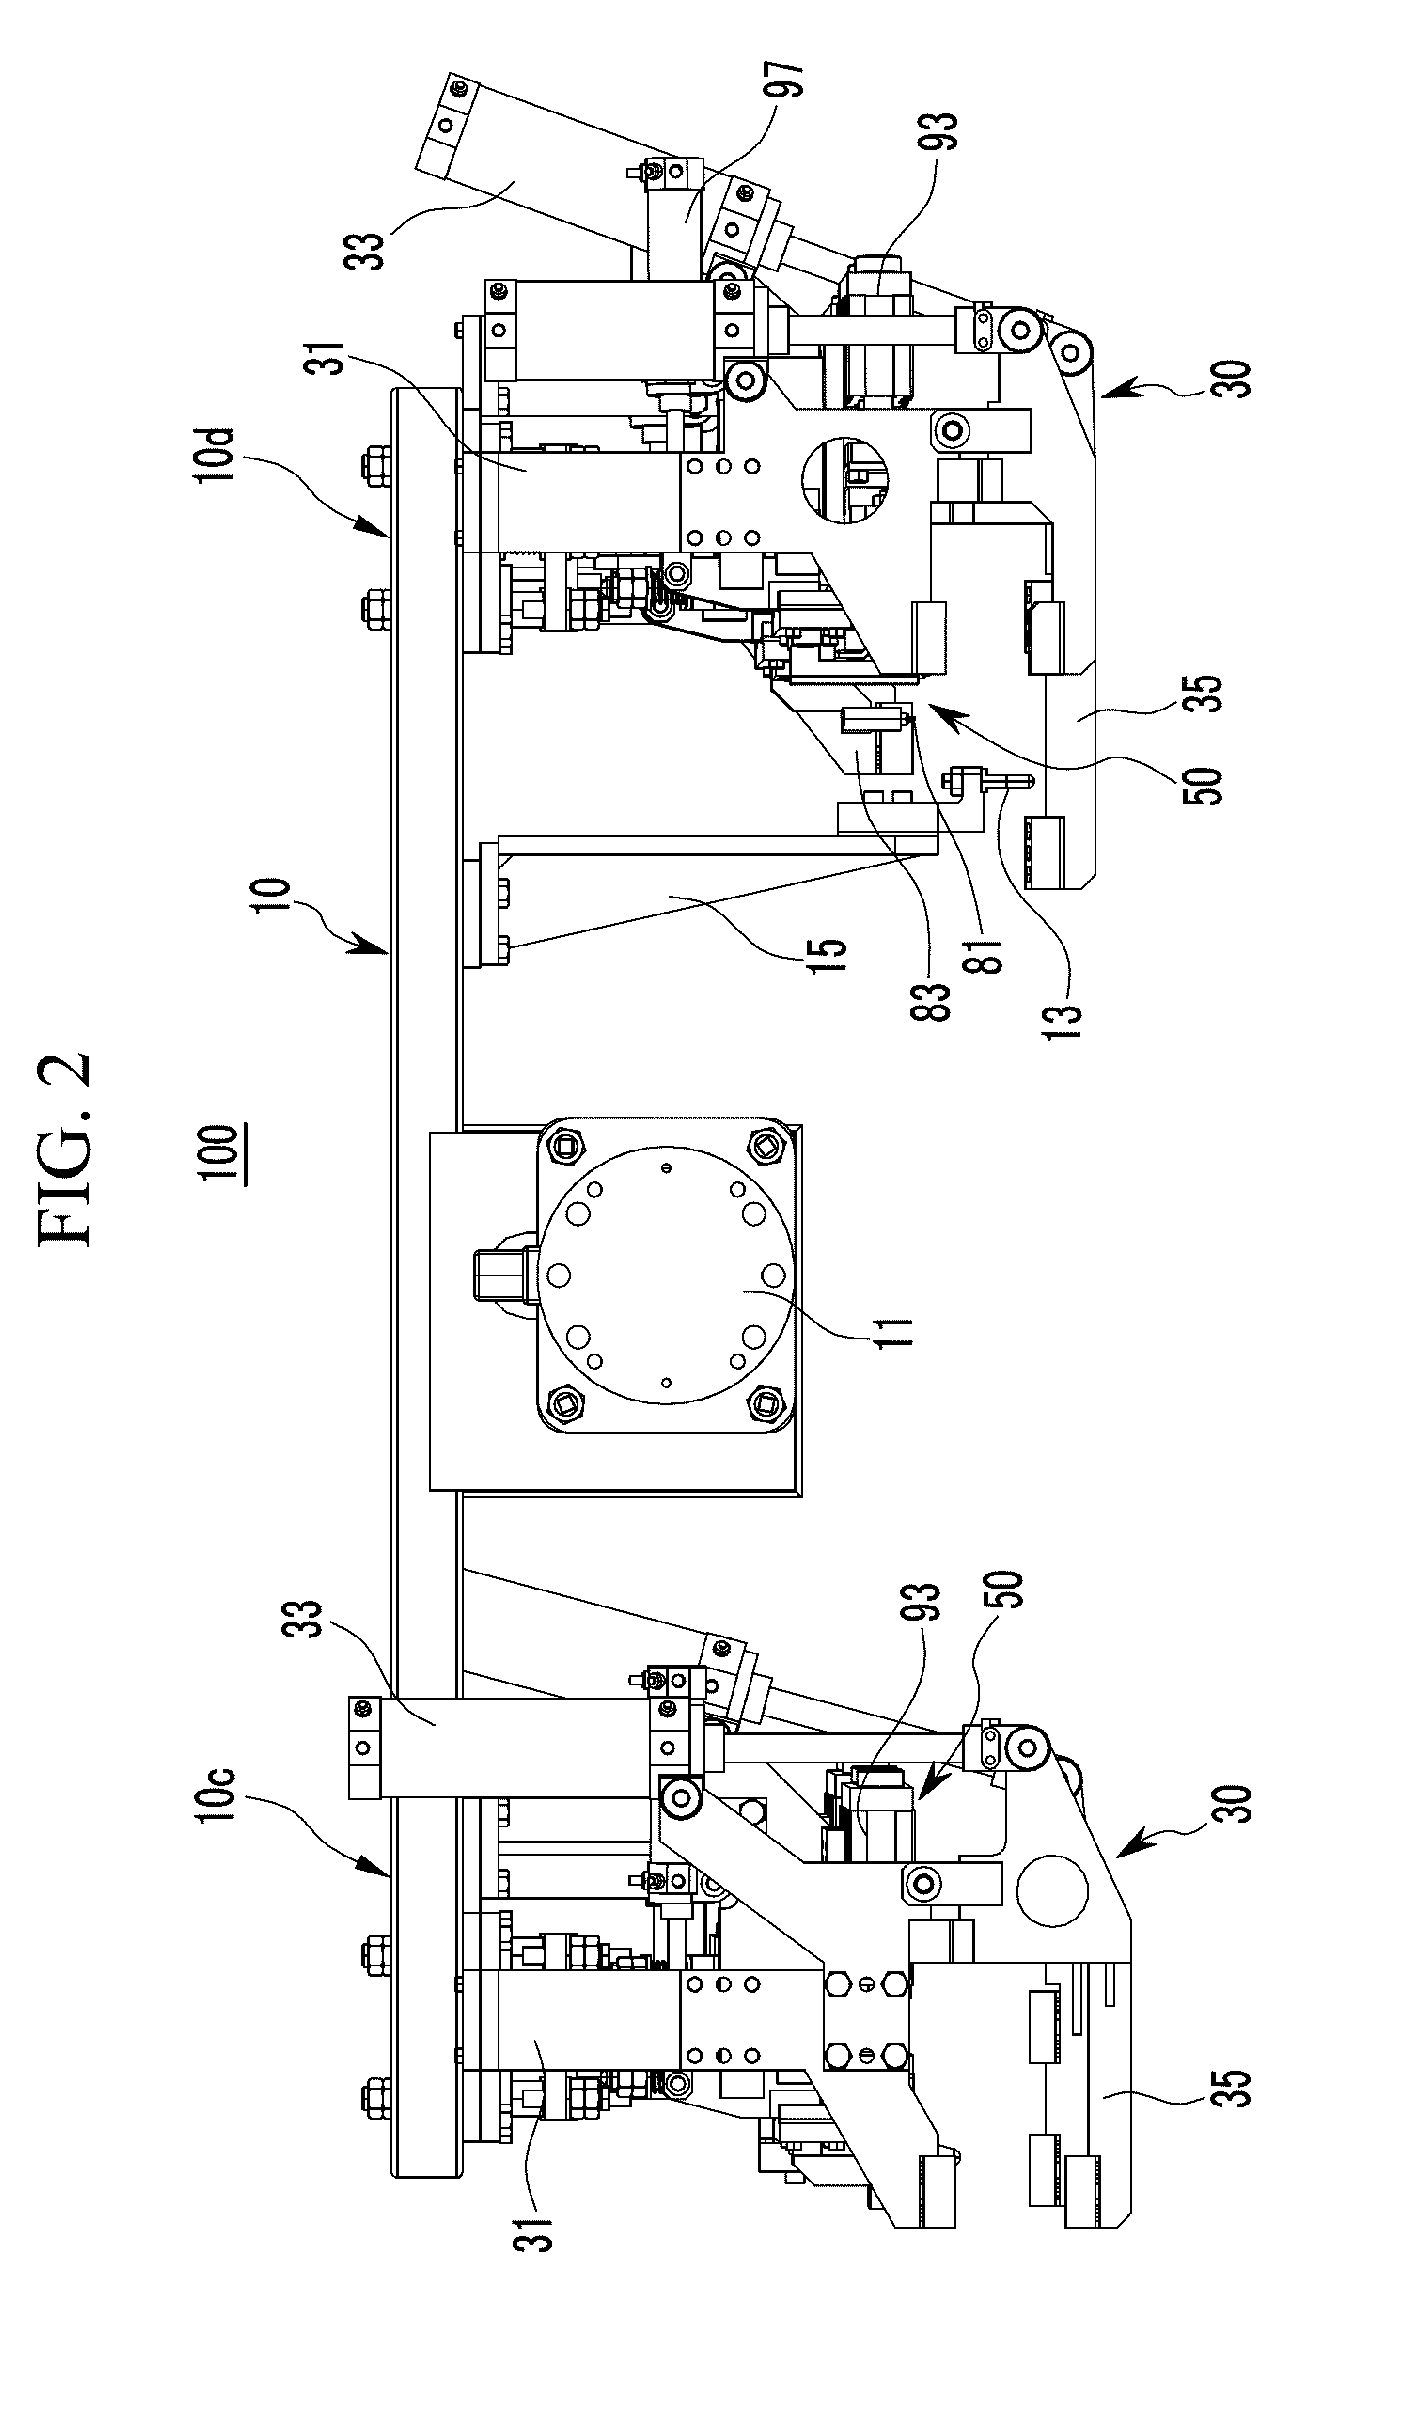 Mounting device for vehicle door hinge